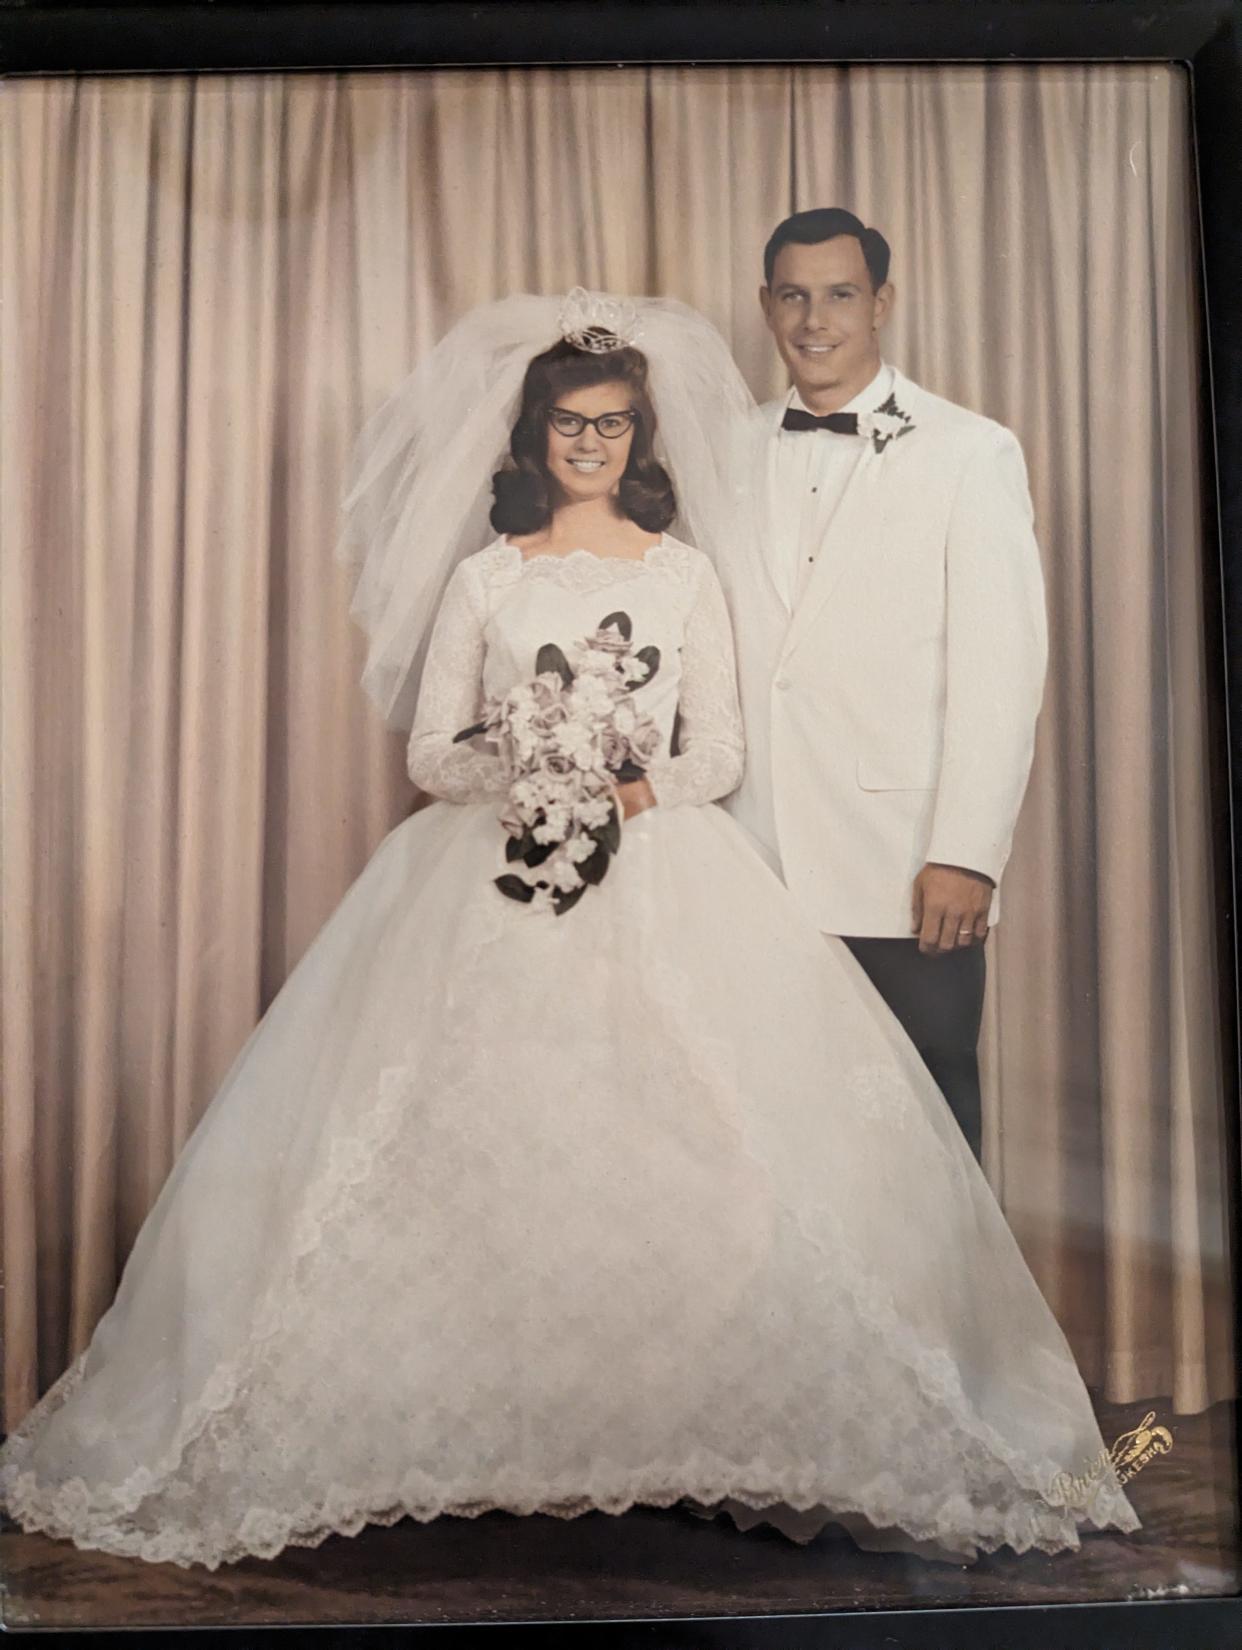 Oconomowoc resident Charlotte Markle, 81, is among the longest-surviving transplant patients of Mayo Clinic. Her Mayo team diagnosed Markle with irreversible chronic kidney failure shortly after she got married and she had her transplant on March 2, 1966. She is shown in her wedding picture with her late husband David Markle.